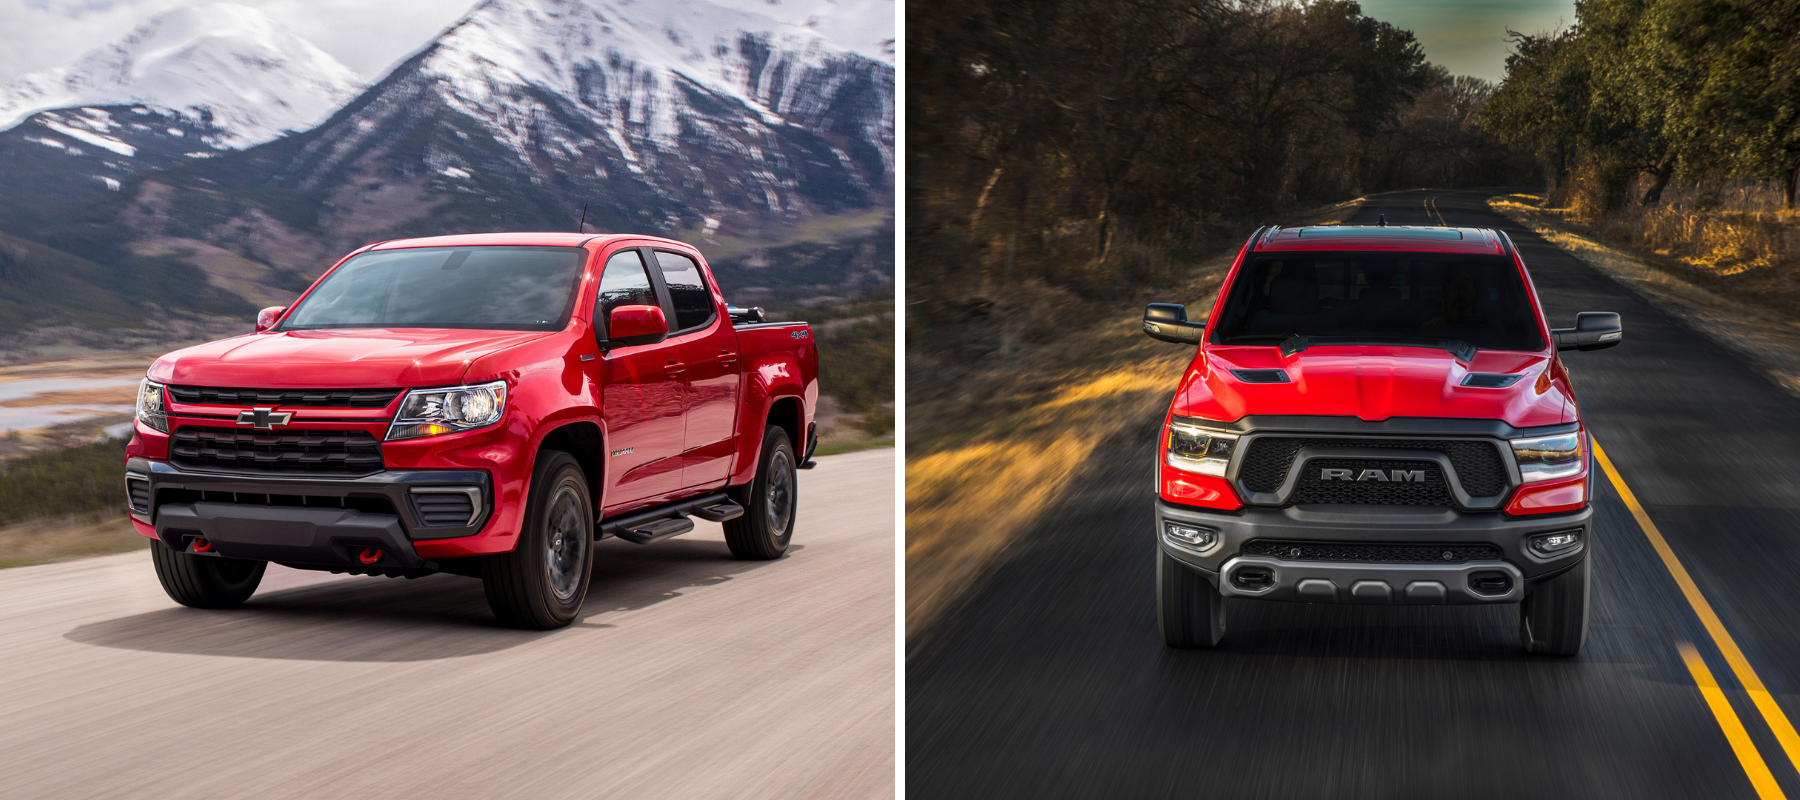 2022 Chevy Silverado 1500 Trail Boss and 2022 Ram 1500 Rebel full-size off-road pickup truck models in red paint color